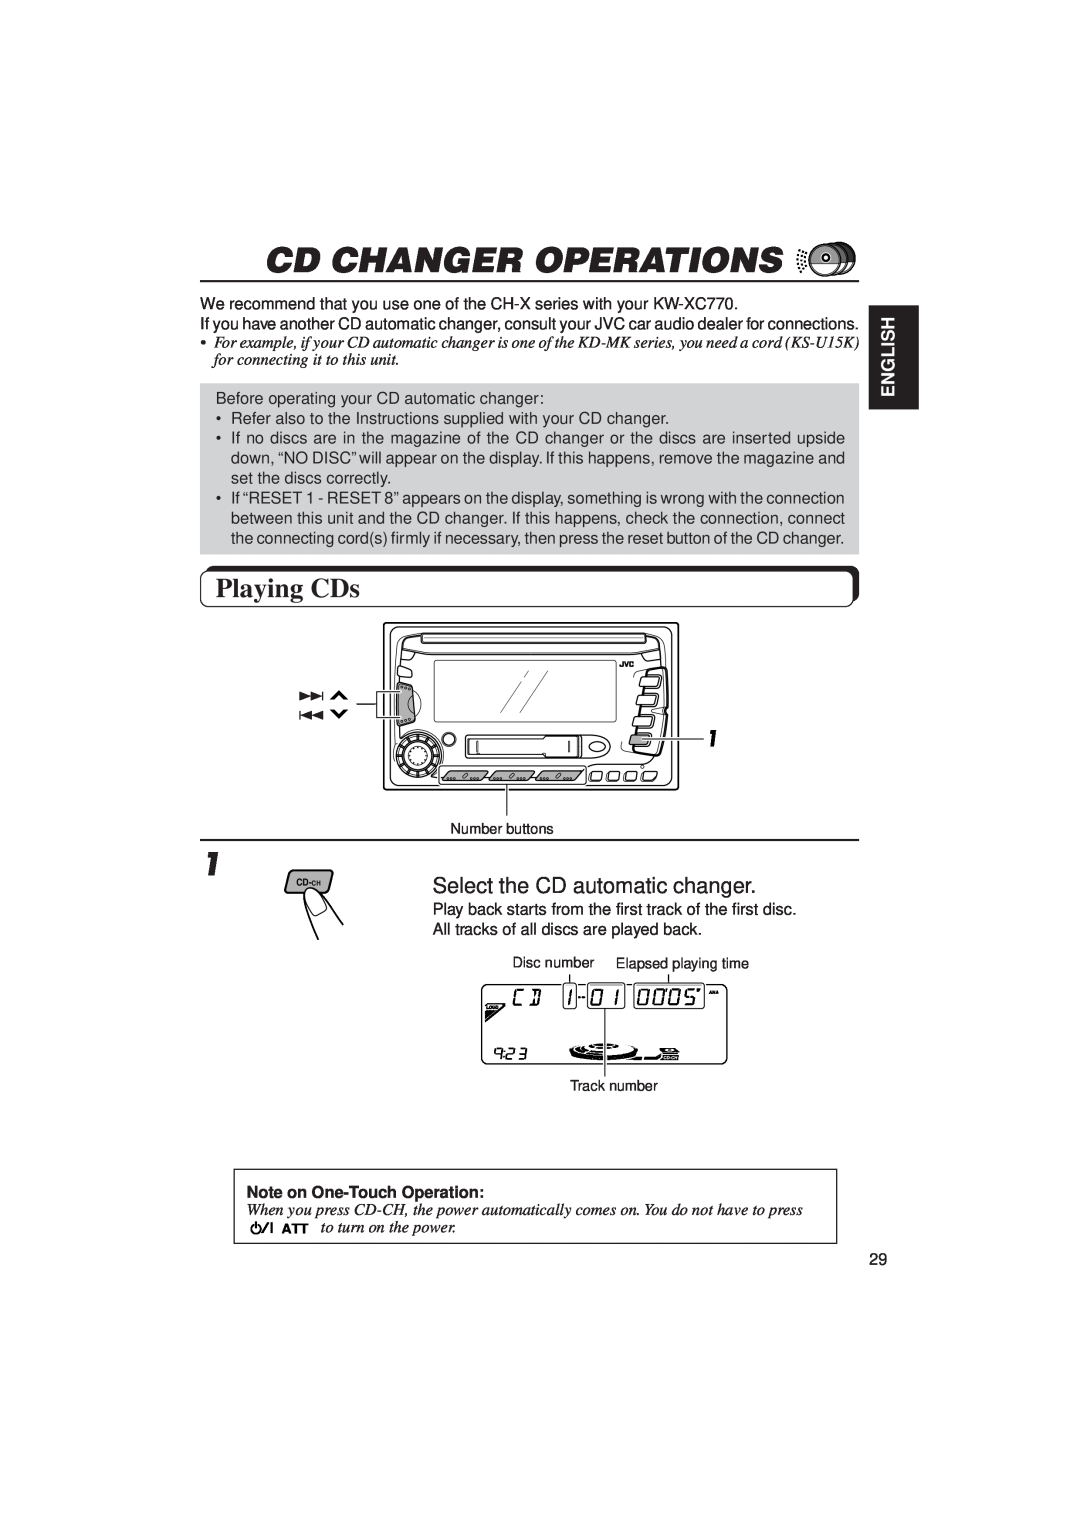 JVC KW-XC770 Cd Changer Operations, Playing CDs, Select the CD automatic changer, English, Note on One-Touch Operation 